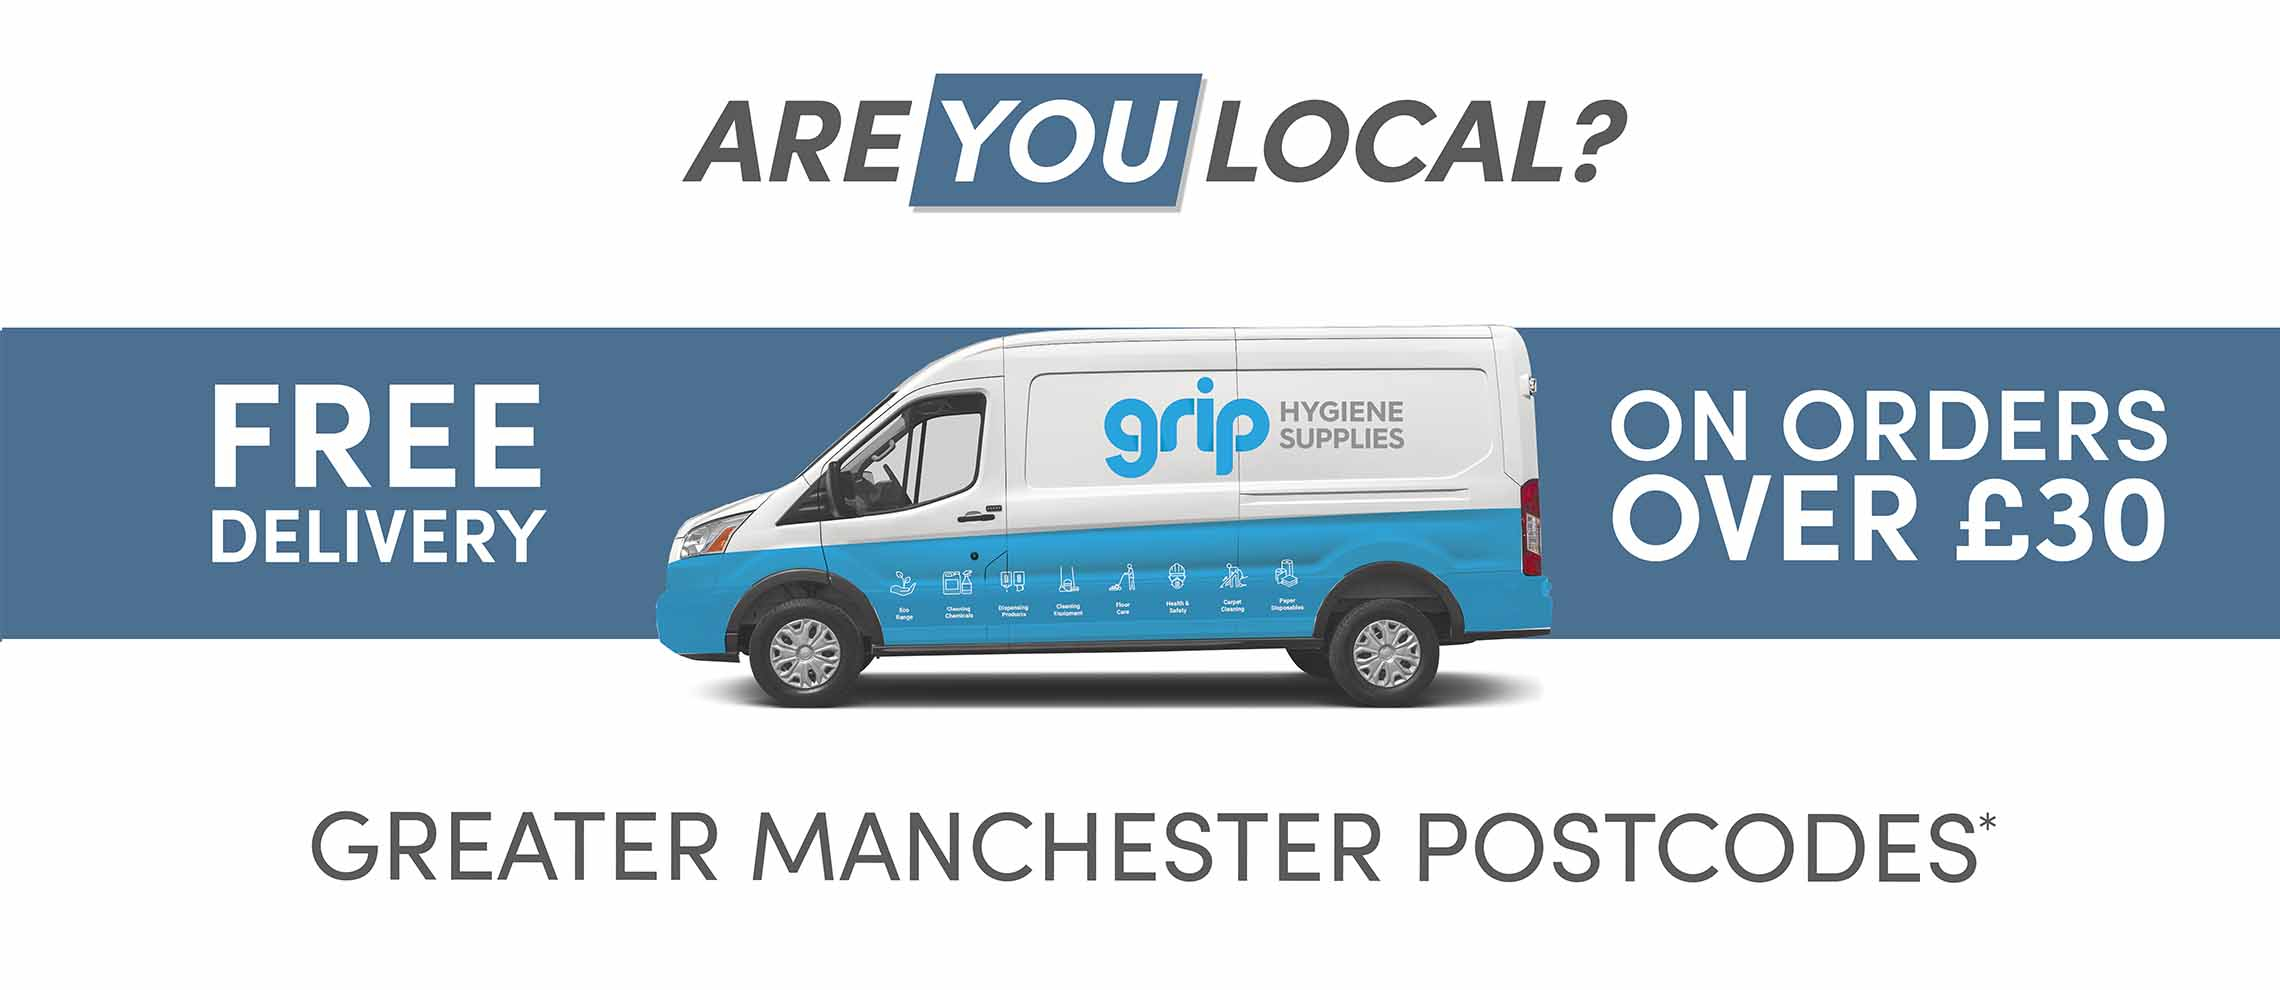 Cleaning products free delivery to greater manchester